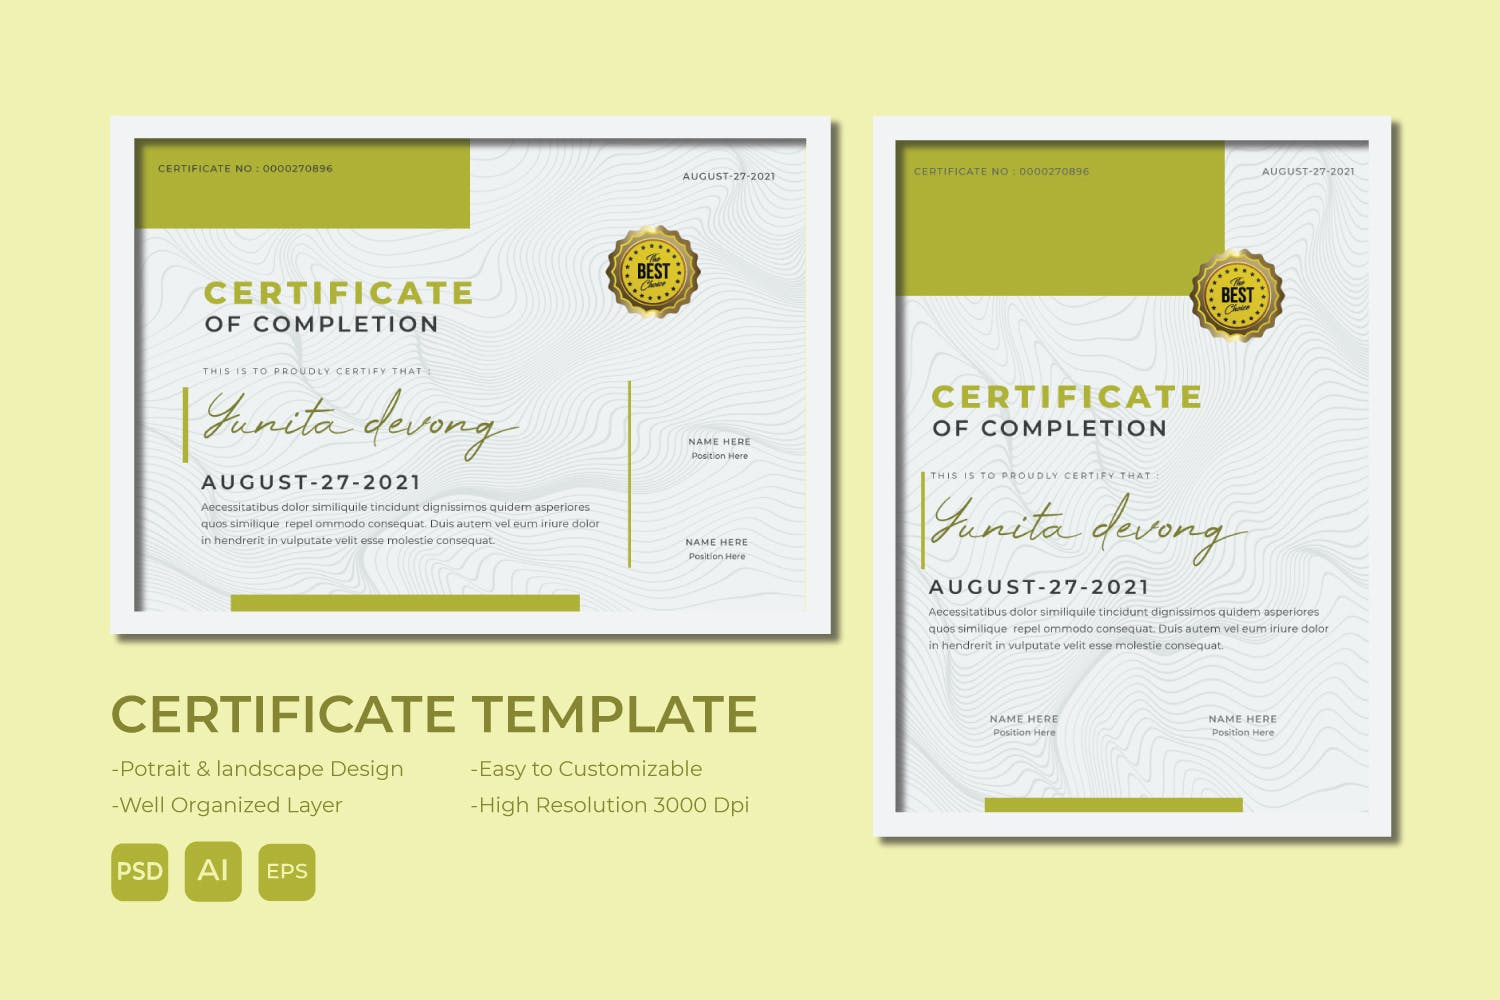 10+ Best Certificate Templates for Microsoft Word 1022 - Theme Junkie With Downloadable Certificate Templates For Microsoft Word